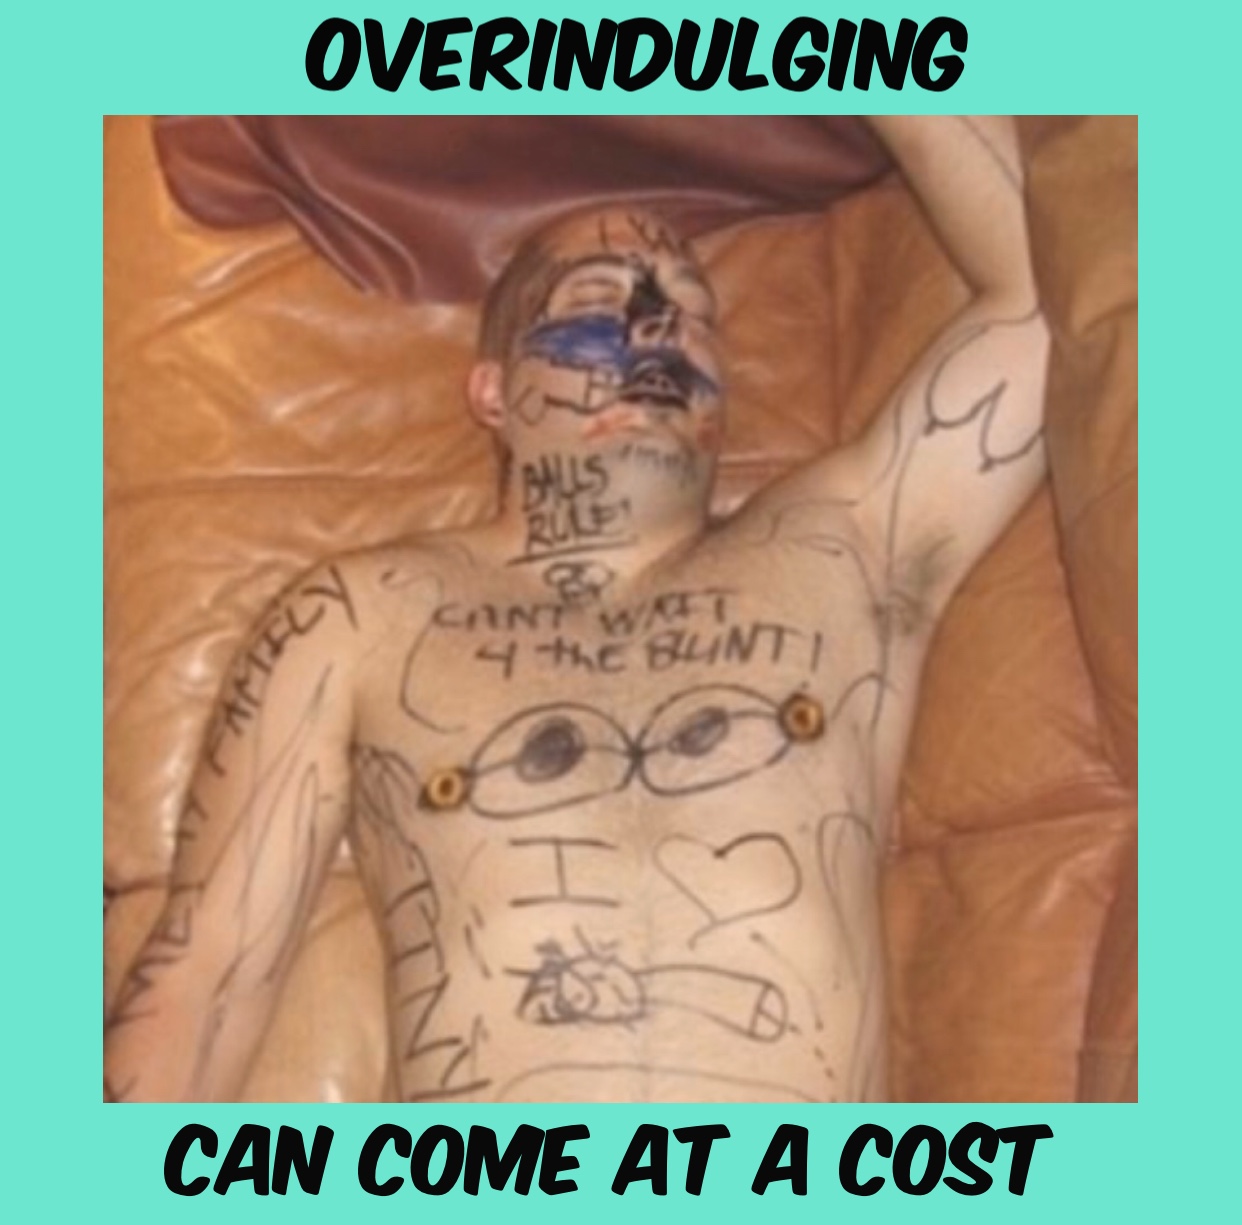 chest - Overindulging Rule Cant Et 4 the Sunt Can Come At A Cost